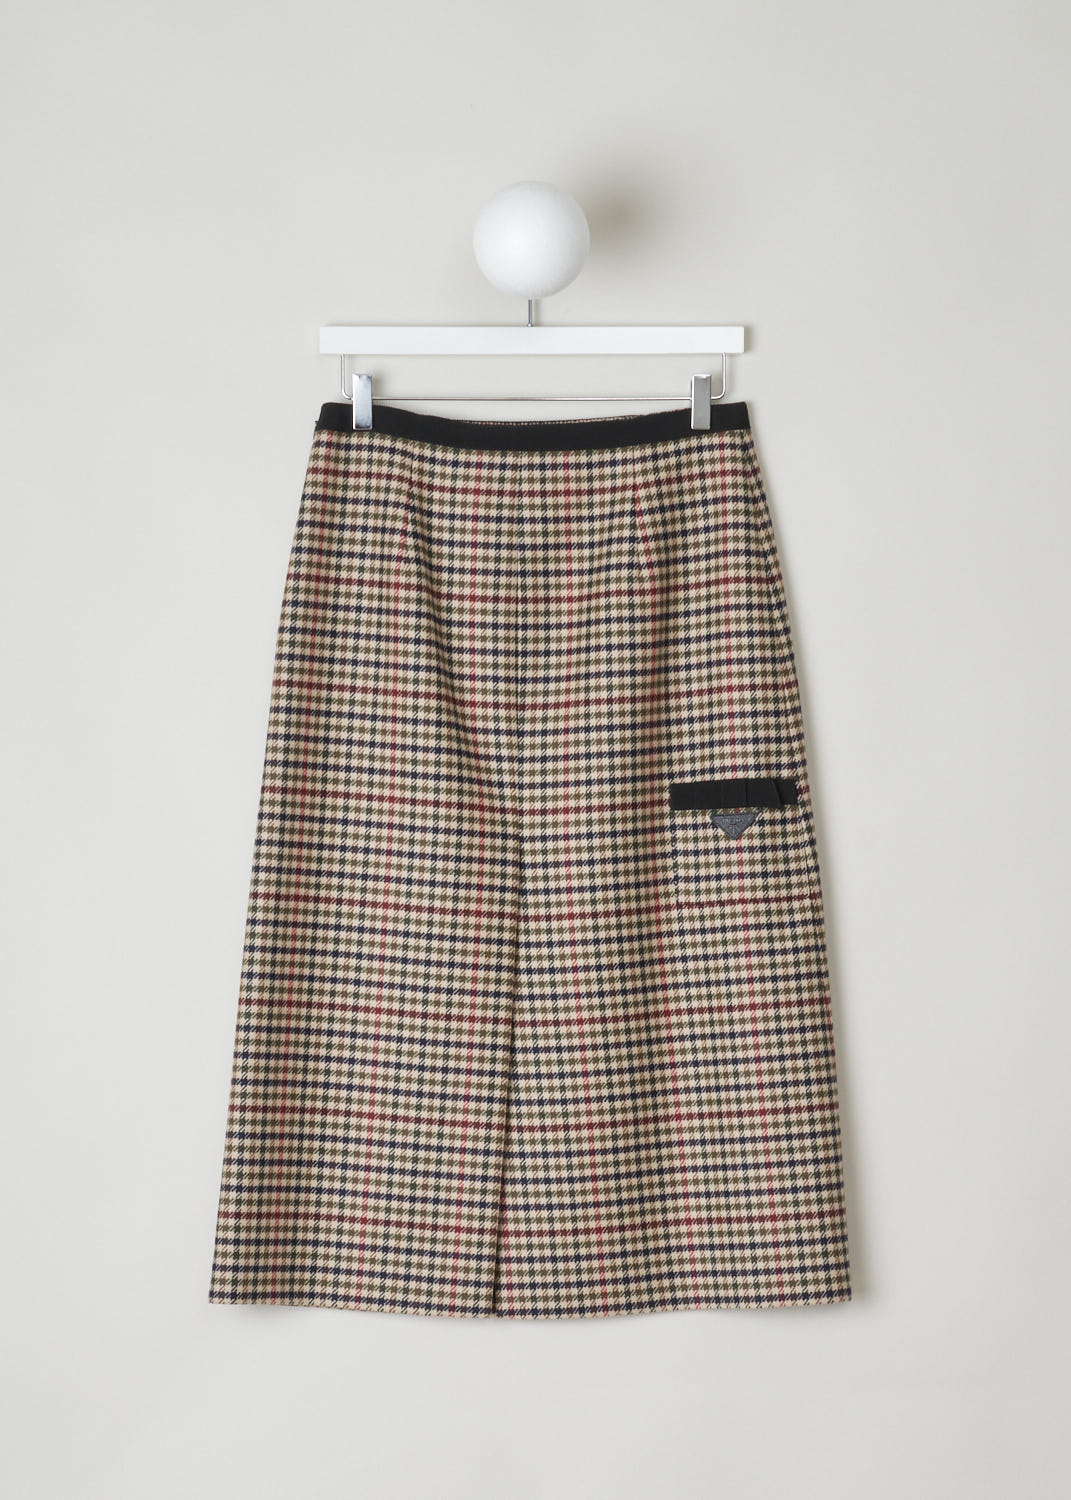 PRADA, CHECKED A-LINE MIDI SKIRT, PANNO_FANTASIA_P184R_1XF9_BLEU, Red, Brown, Print, Back, Beautiful argyle midi skirt in browns and reds. This A-line skirt has a contrasting black trim along the waist. That same trim can be found in the back, decorating the patch pocket. Also on the patch pocket, a triangle Prada logo can be found in leather. This skirt has a concealed zipper closure in the side seam. In the back, a centre slit can be found.